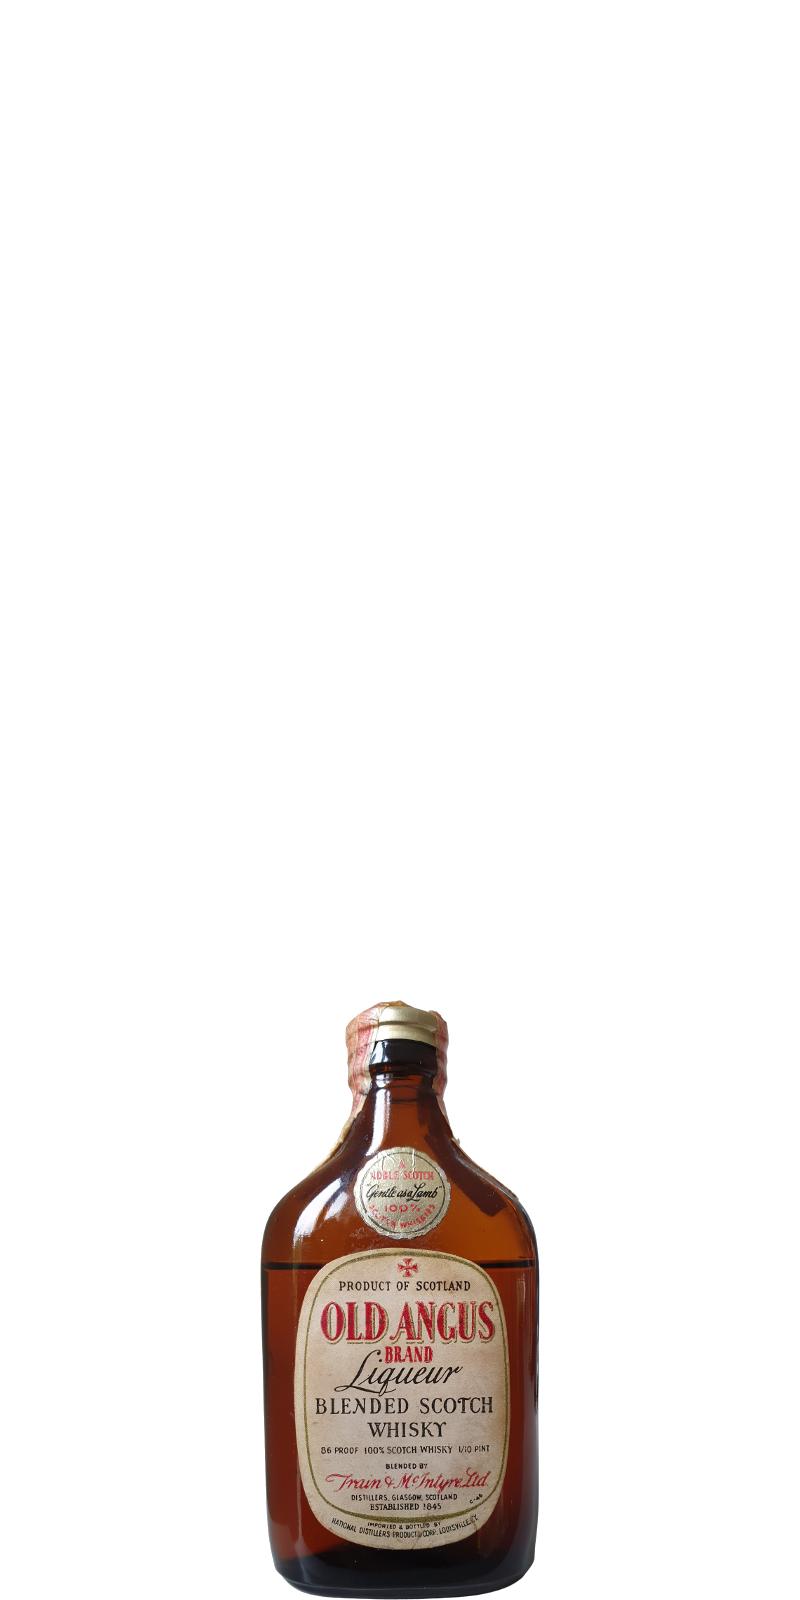 Old Angus Liqueur Blended Scotch Whisky